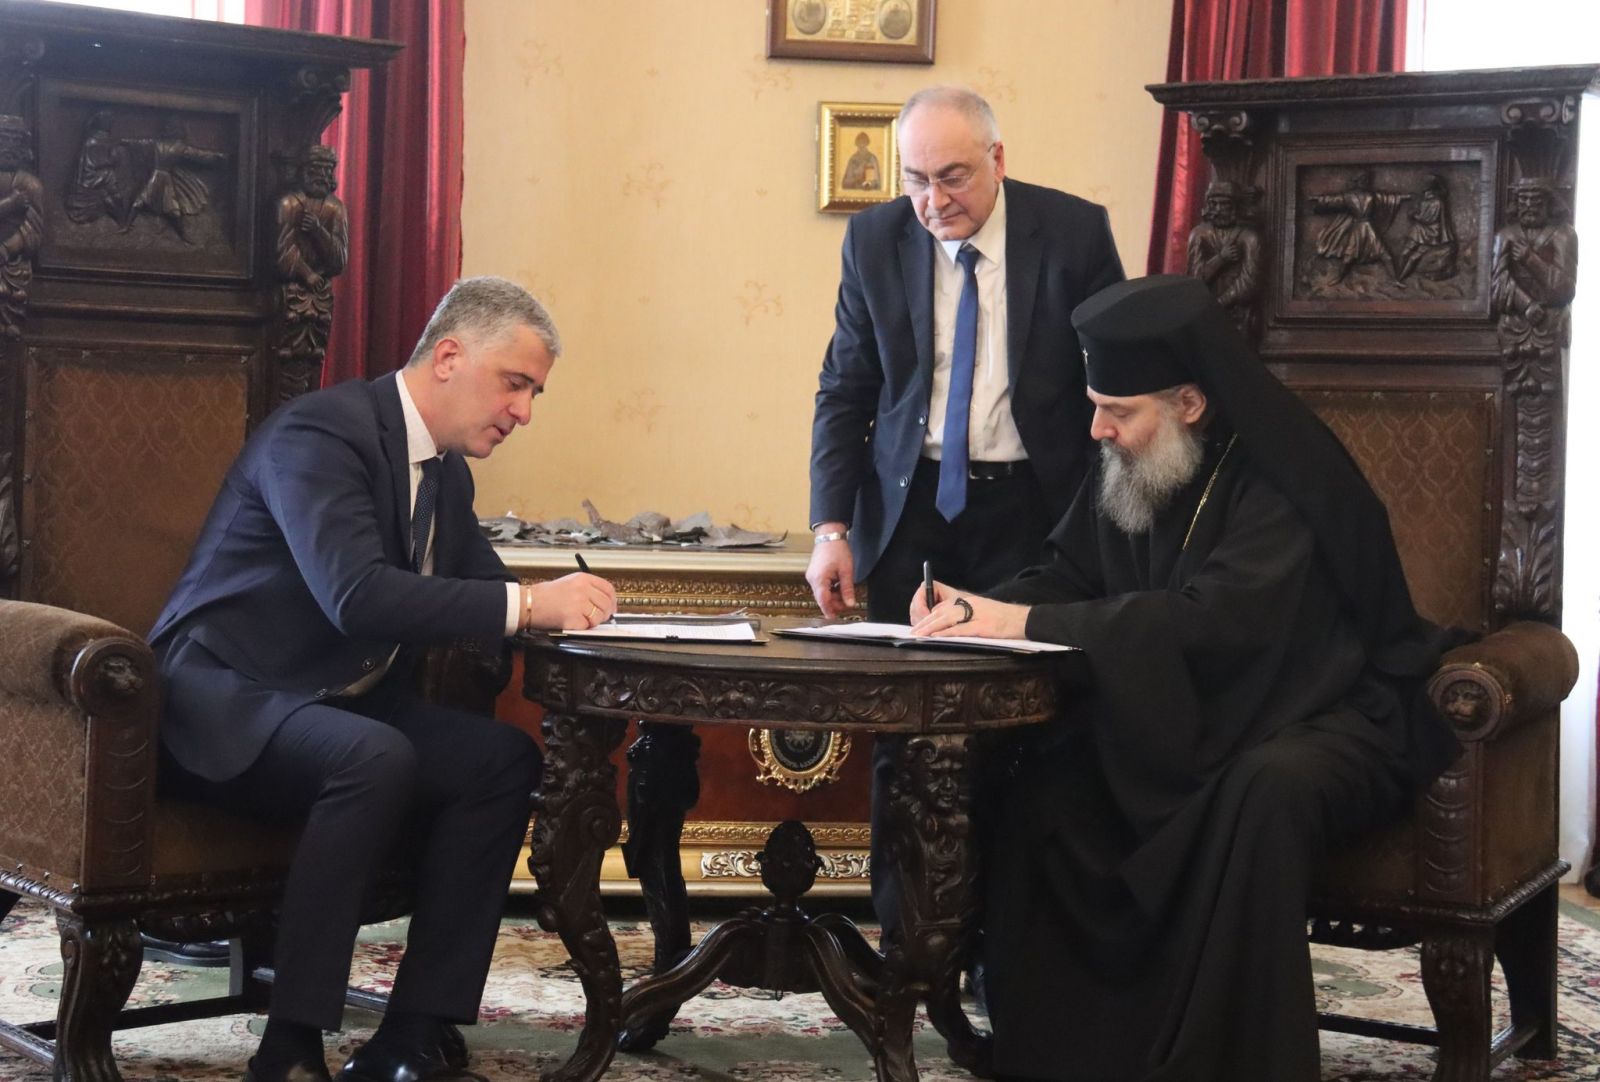 Georgian Orthodox Church and Environment Ministry of Georgia Join Forces for Ecological Improvement